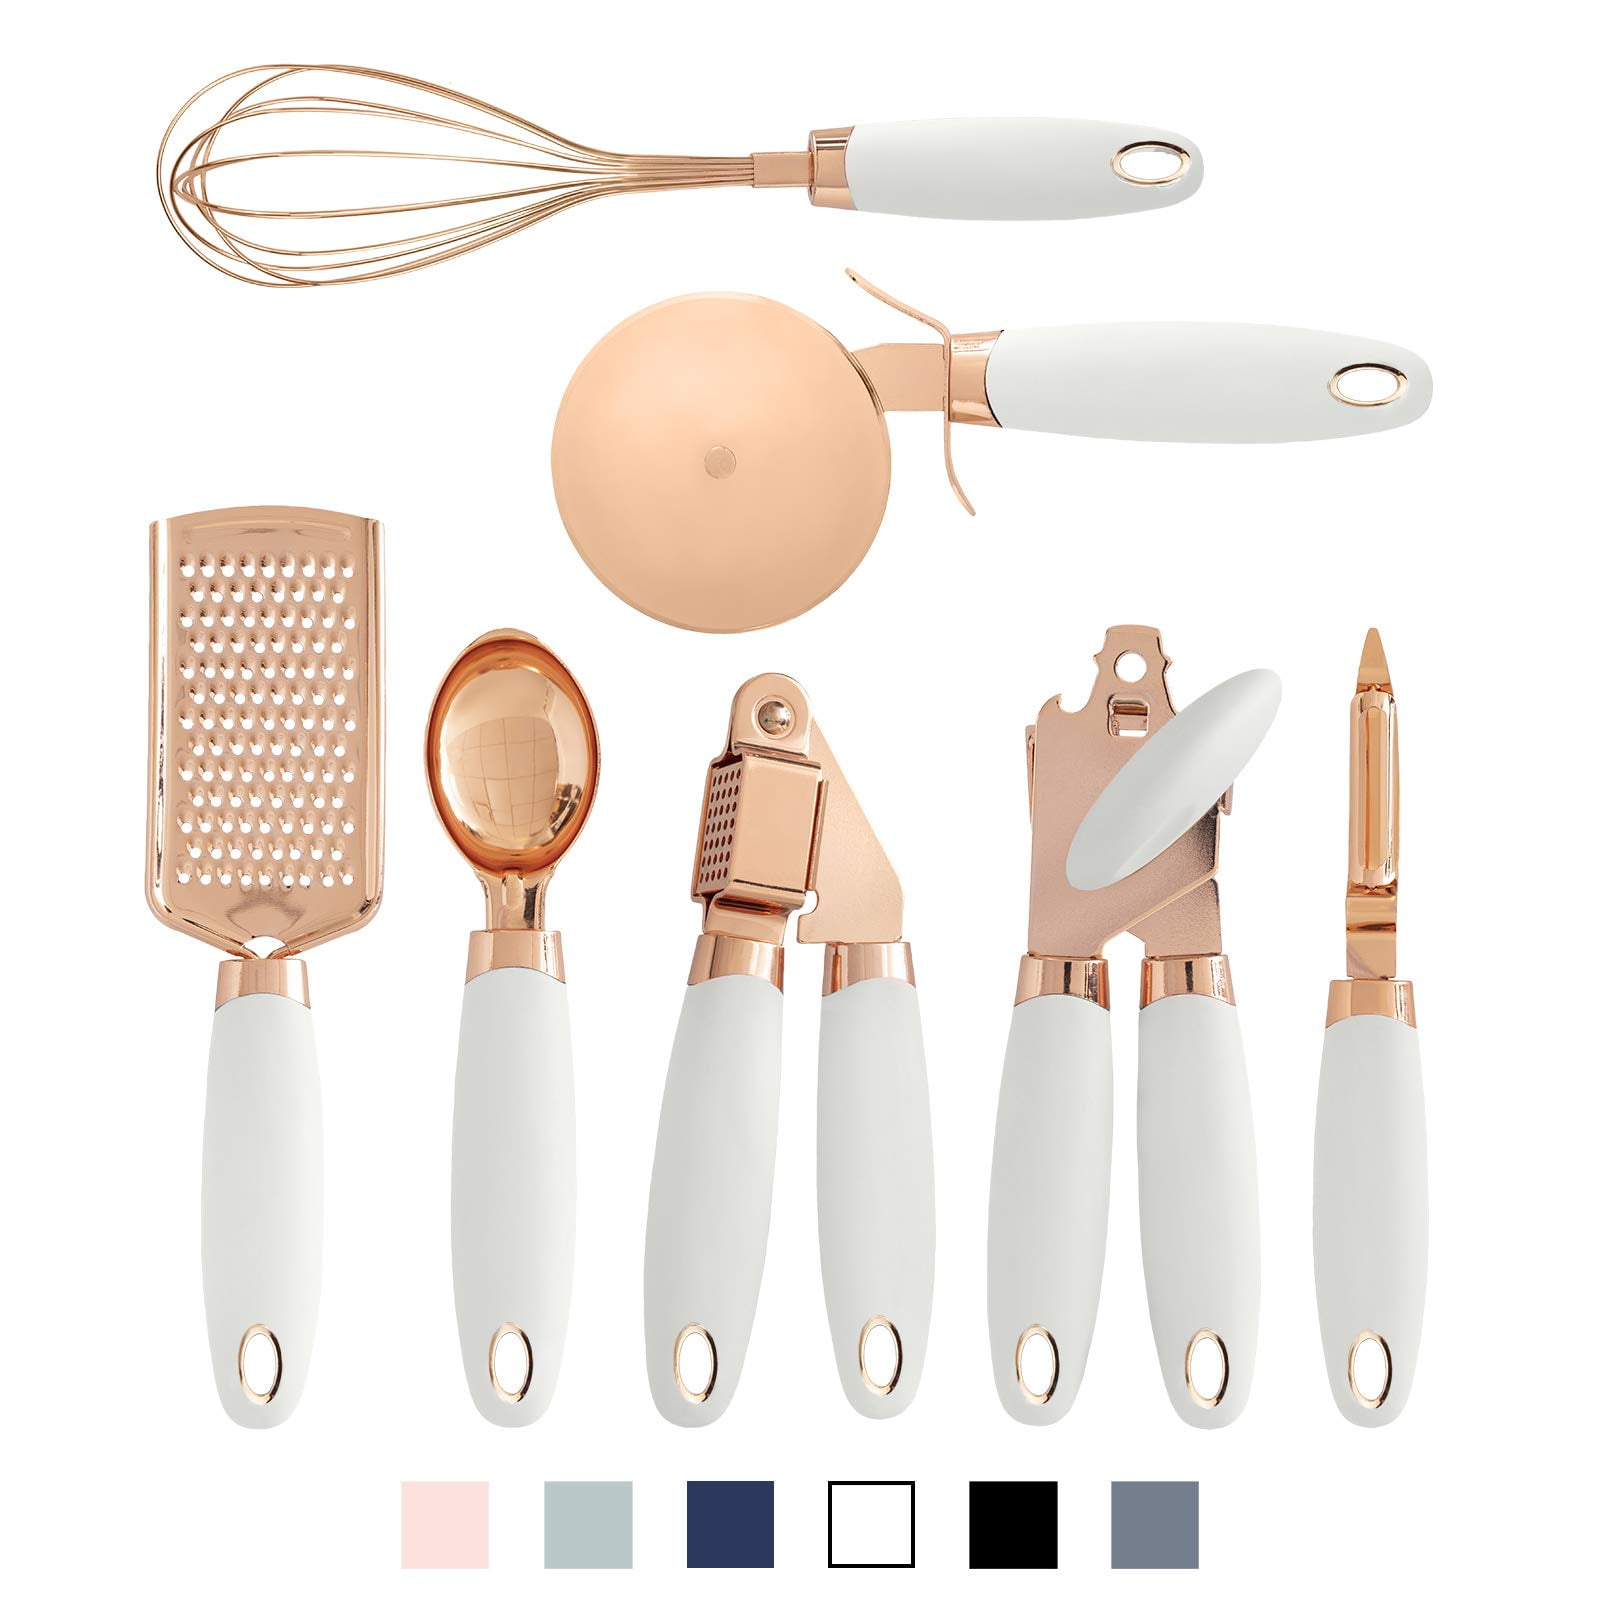 7pc Kitchen Utensil Set in Glossy Golden Color - Online Furniture Store -  My Aashis